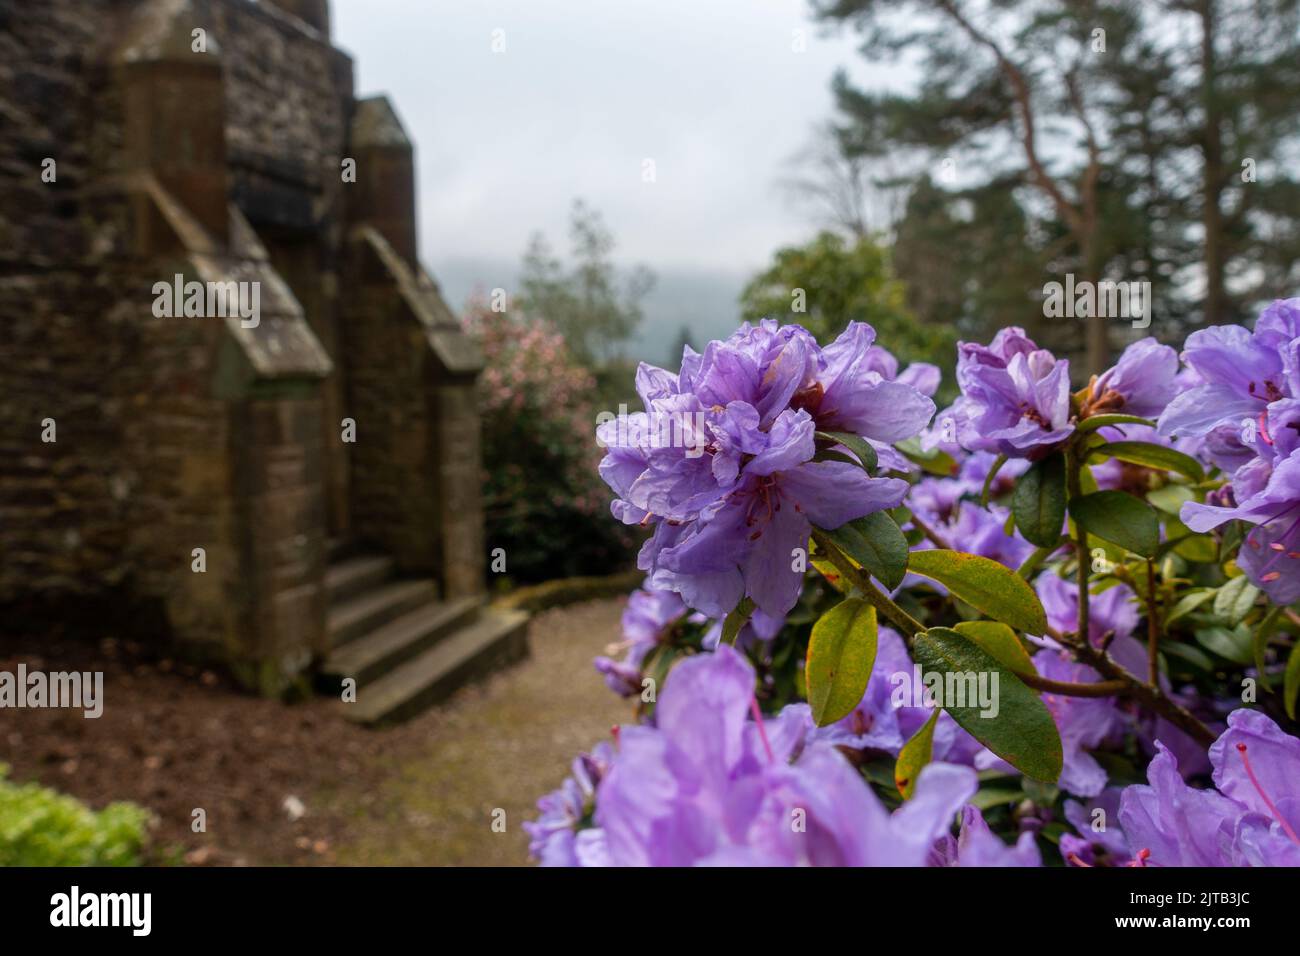 Purple rhododendron hippophaeoides flowers in bloom in the gardens of Parcevall Hall in the Yorkshire Dales National Park, England, UK Stock Photo